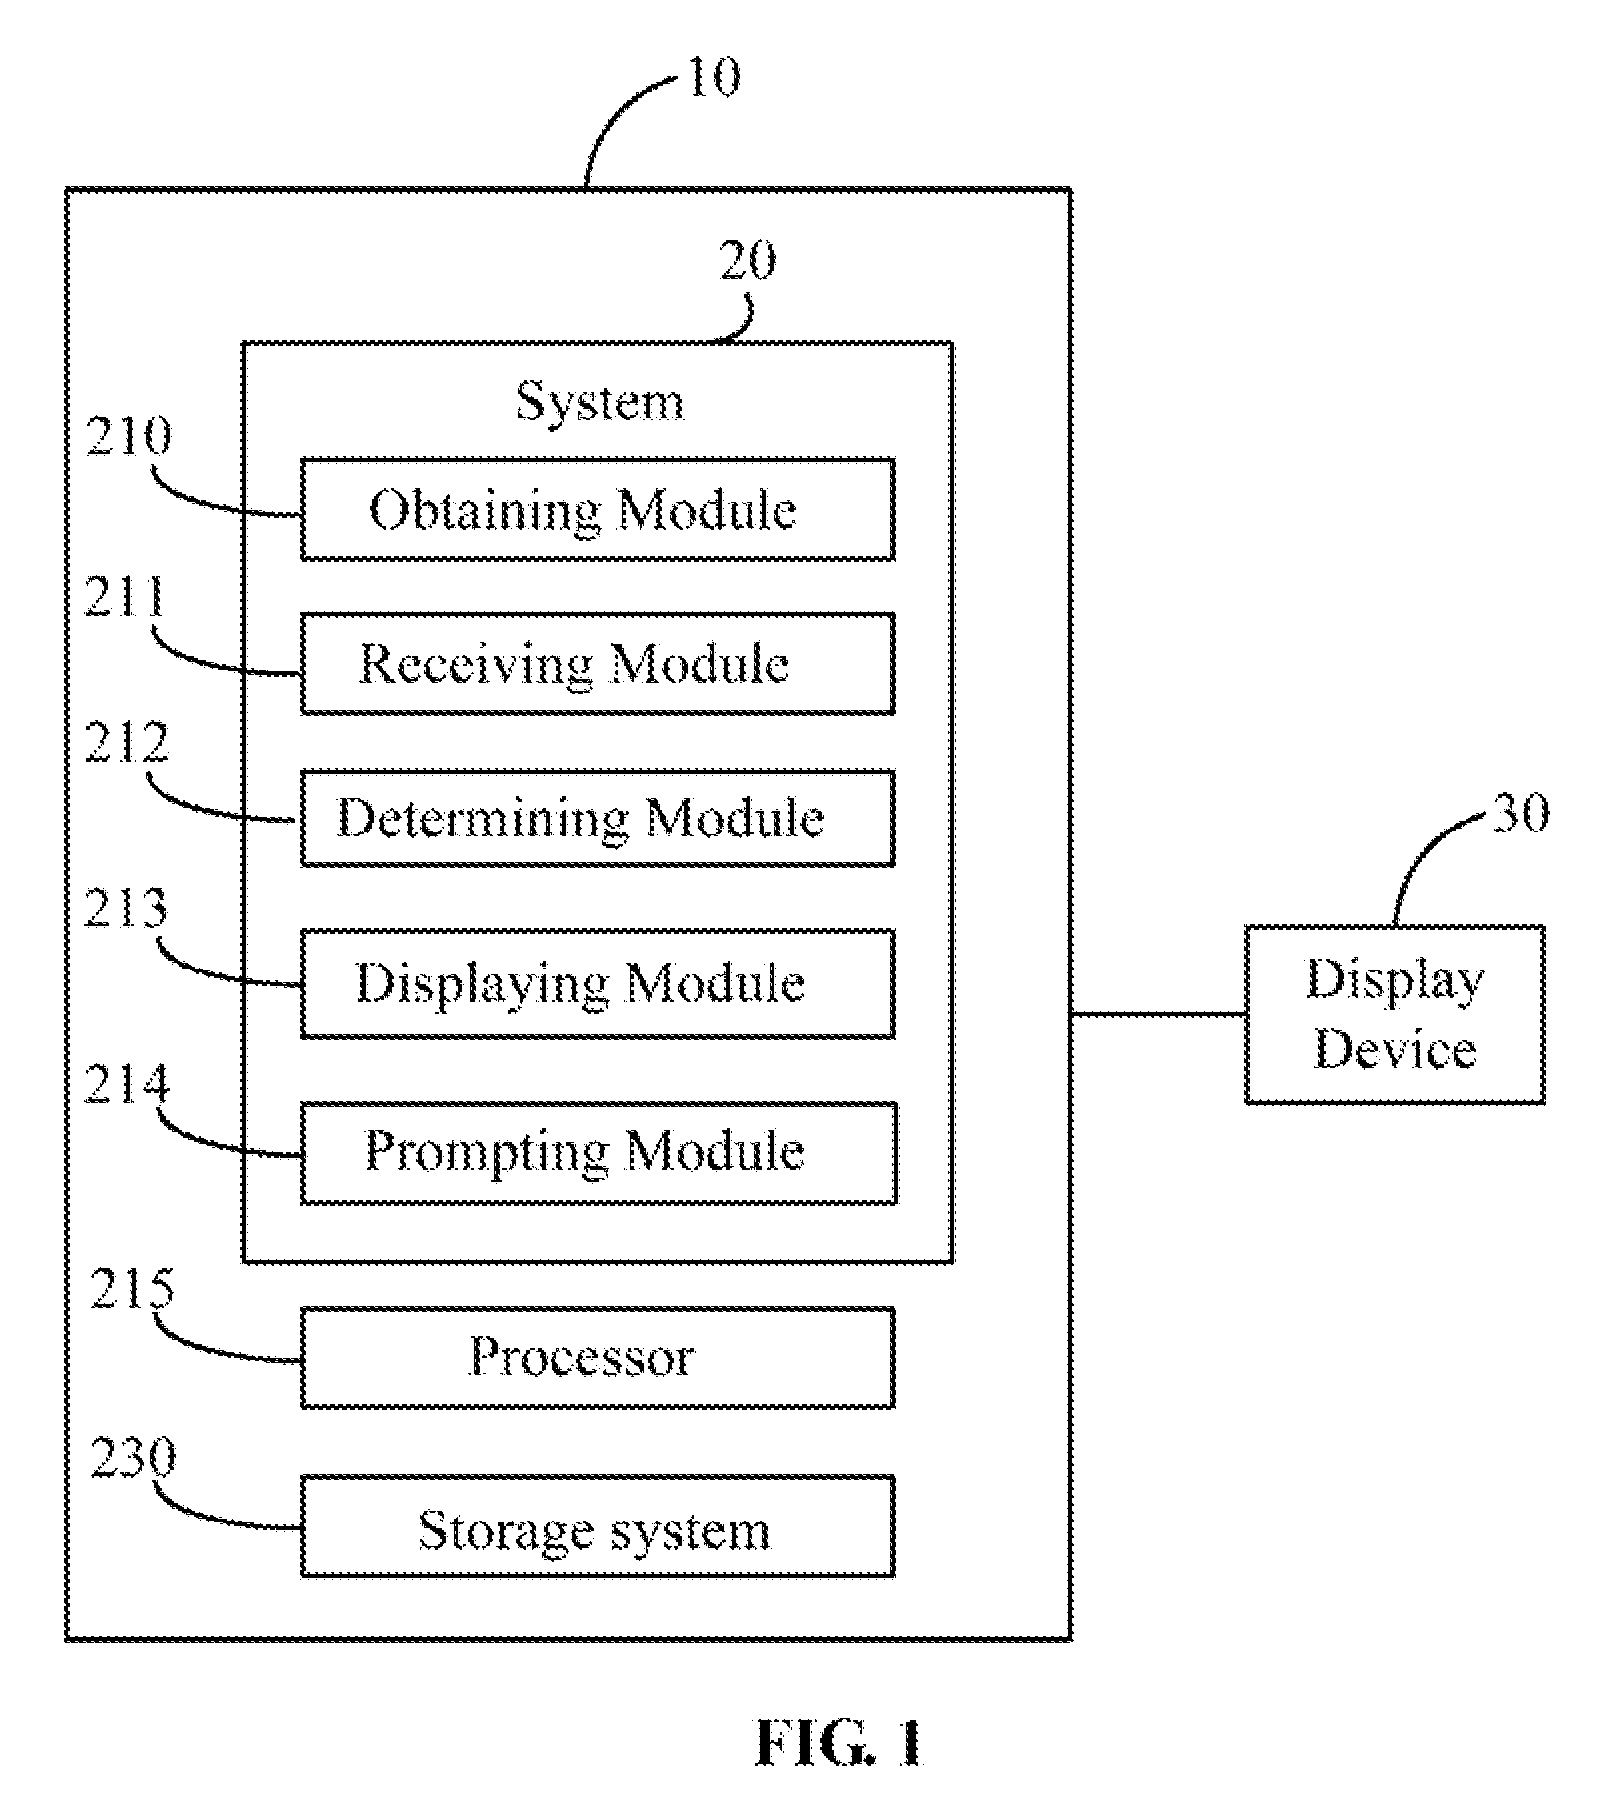 System and method for viewing software help documentation